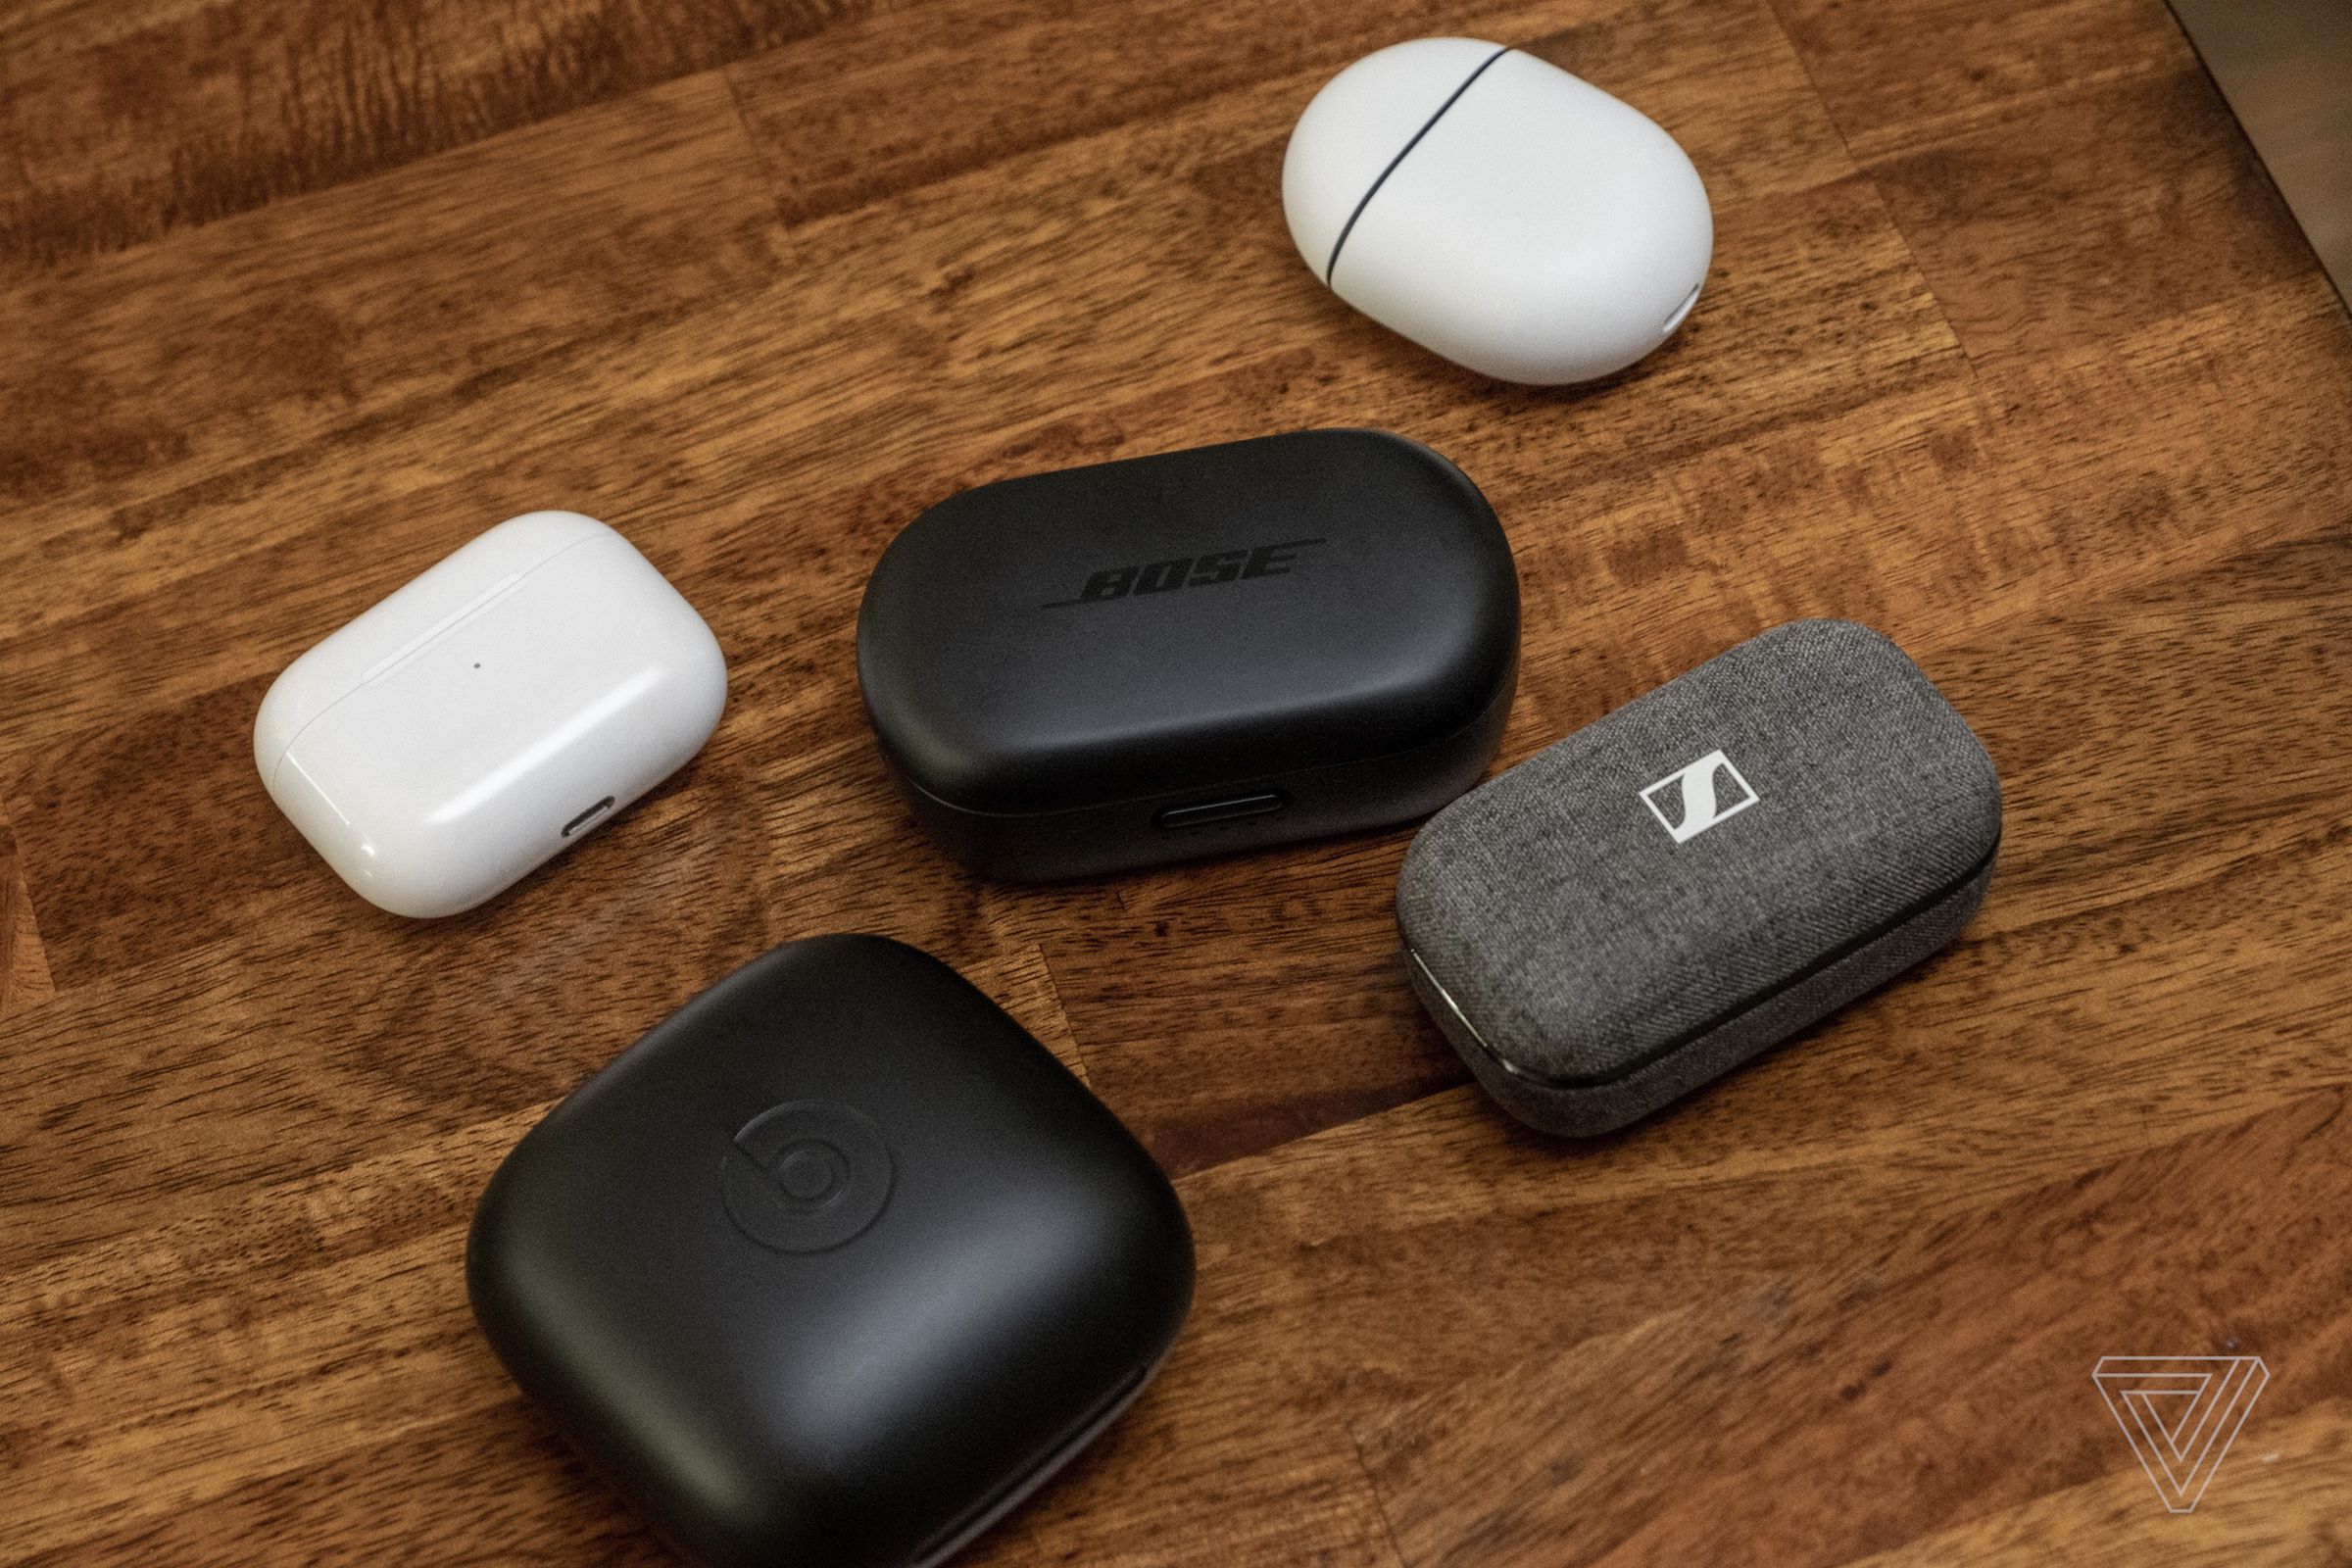 Bose’s QuietComfort Earbuds case next to cases for the AirPods, Pixel Buds, Powerbeats Pro, and Sennheiser Momentum True Wireless 2.